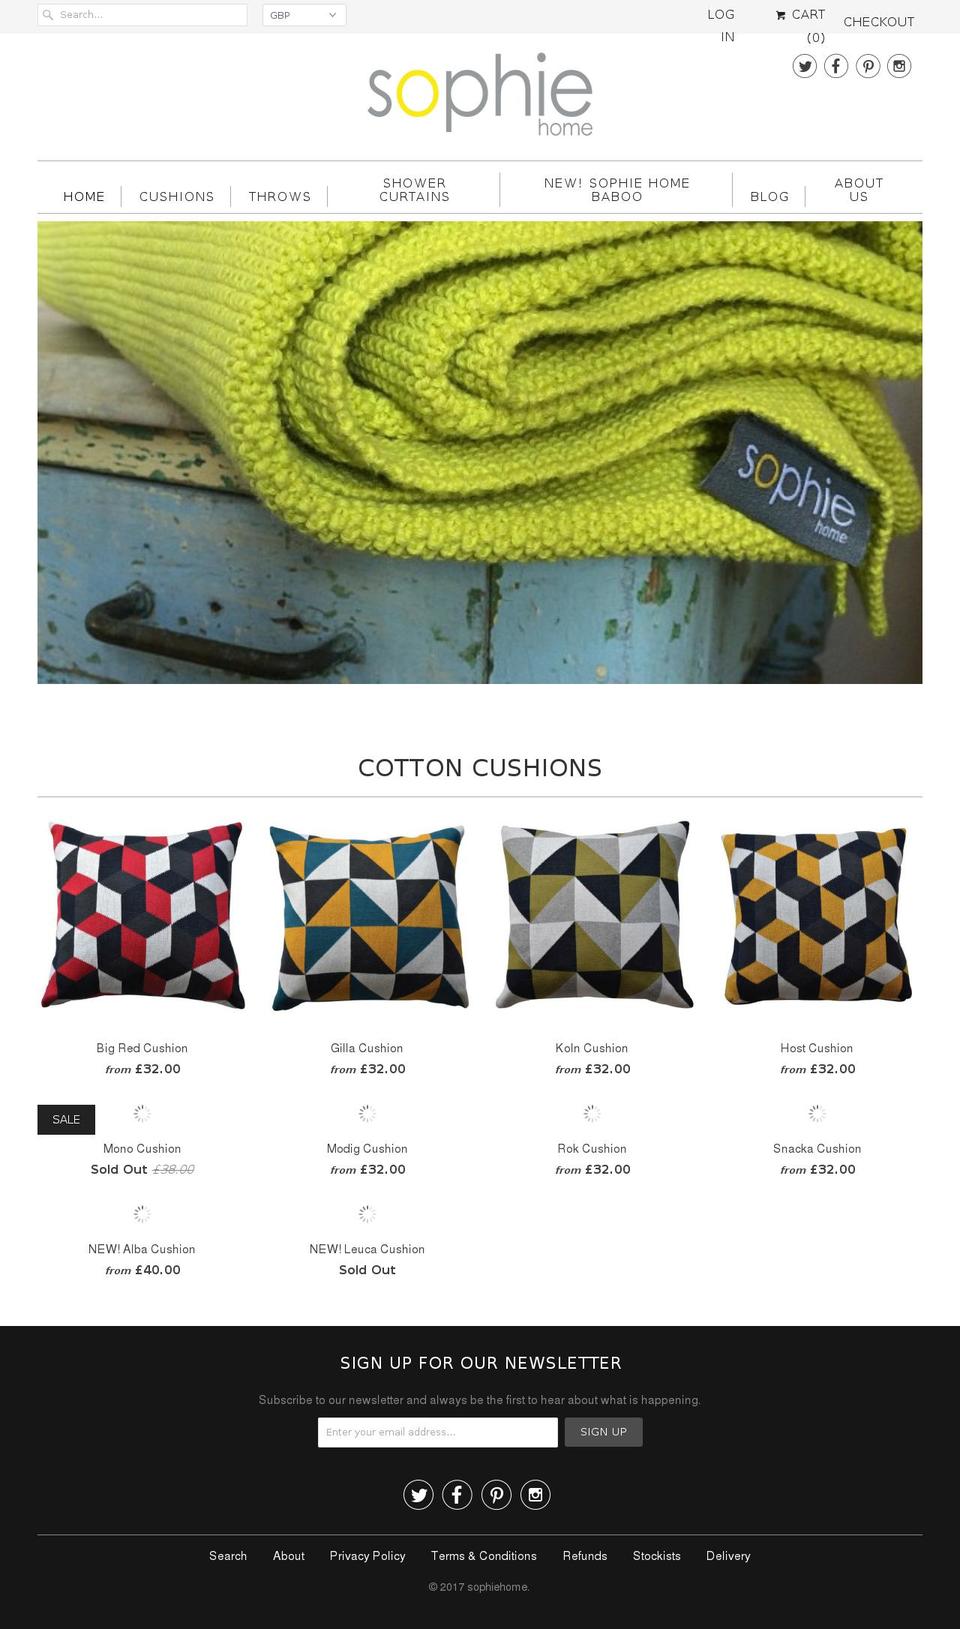 Stockholm Shopify theme site example sophiehome.com